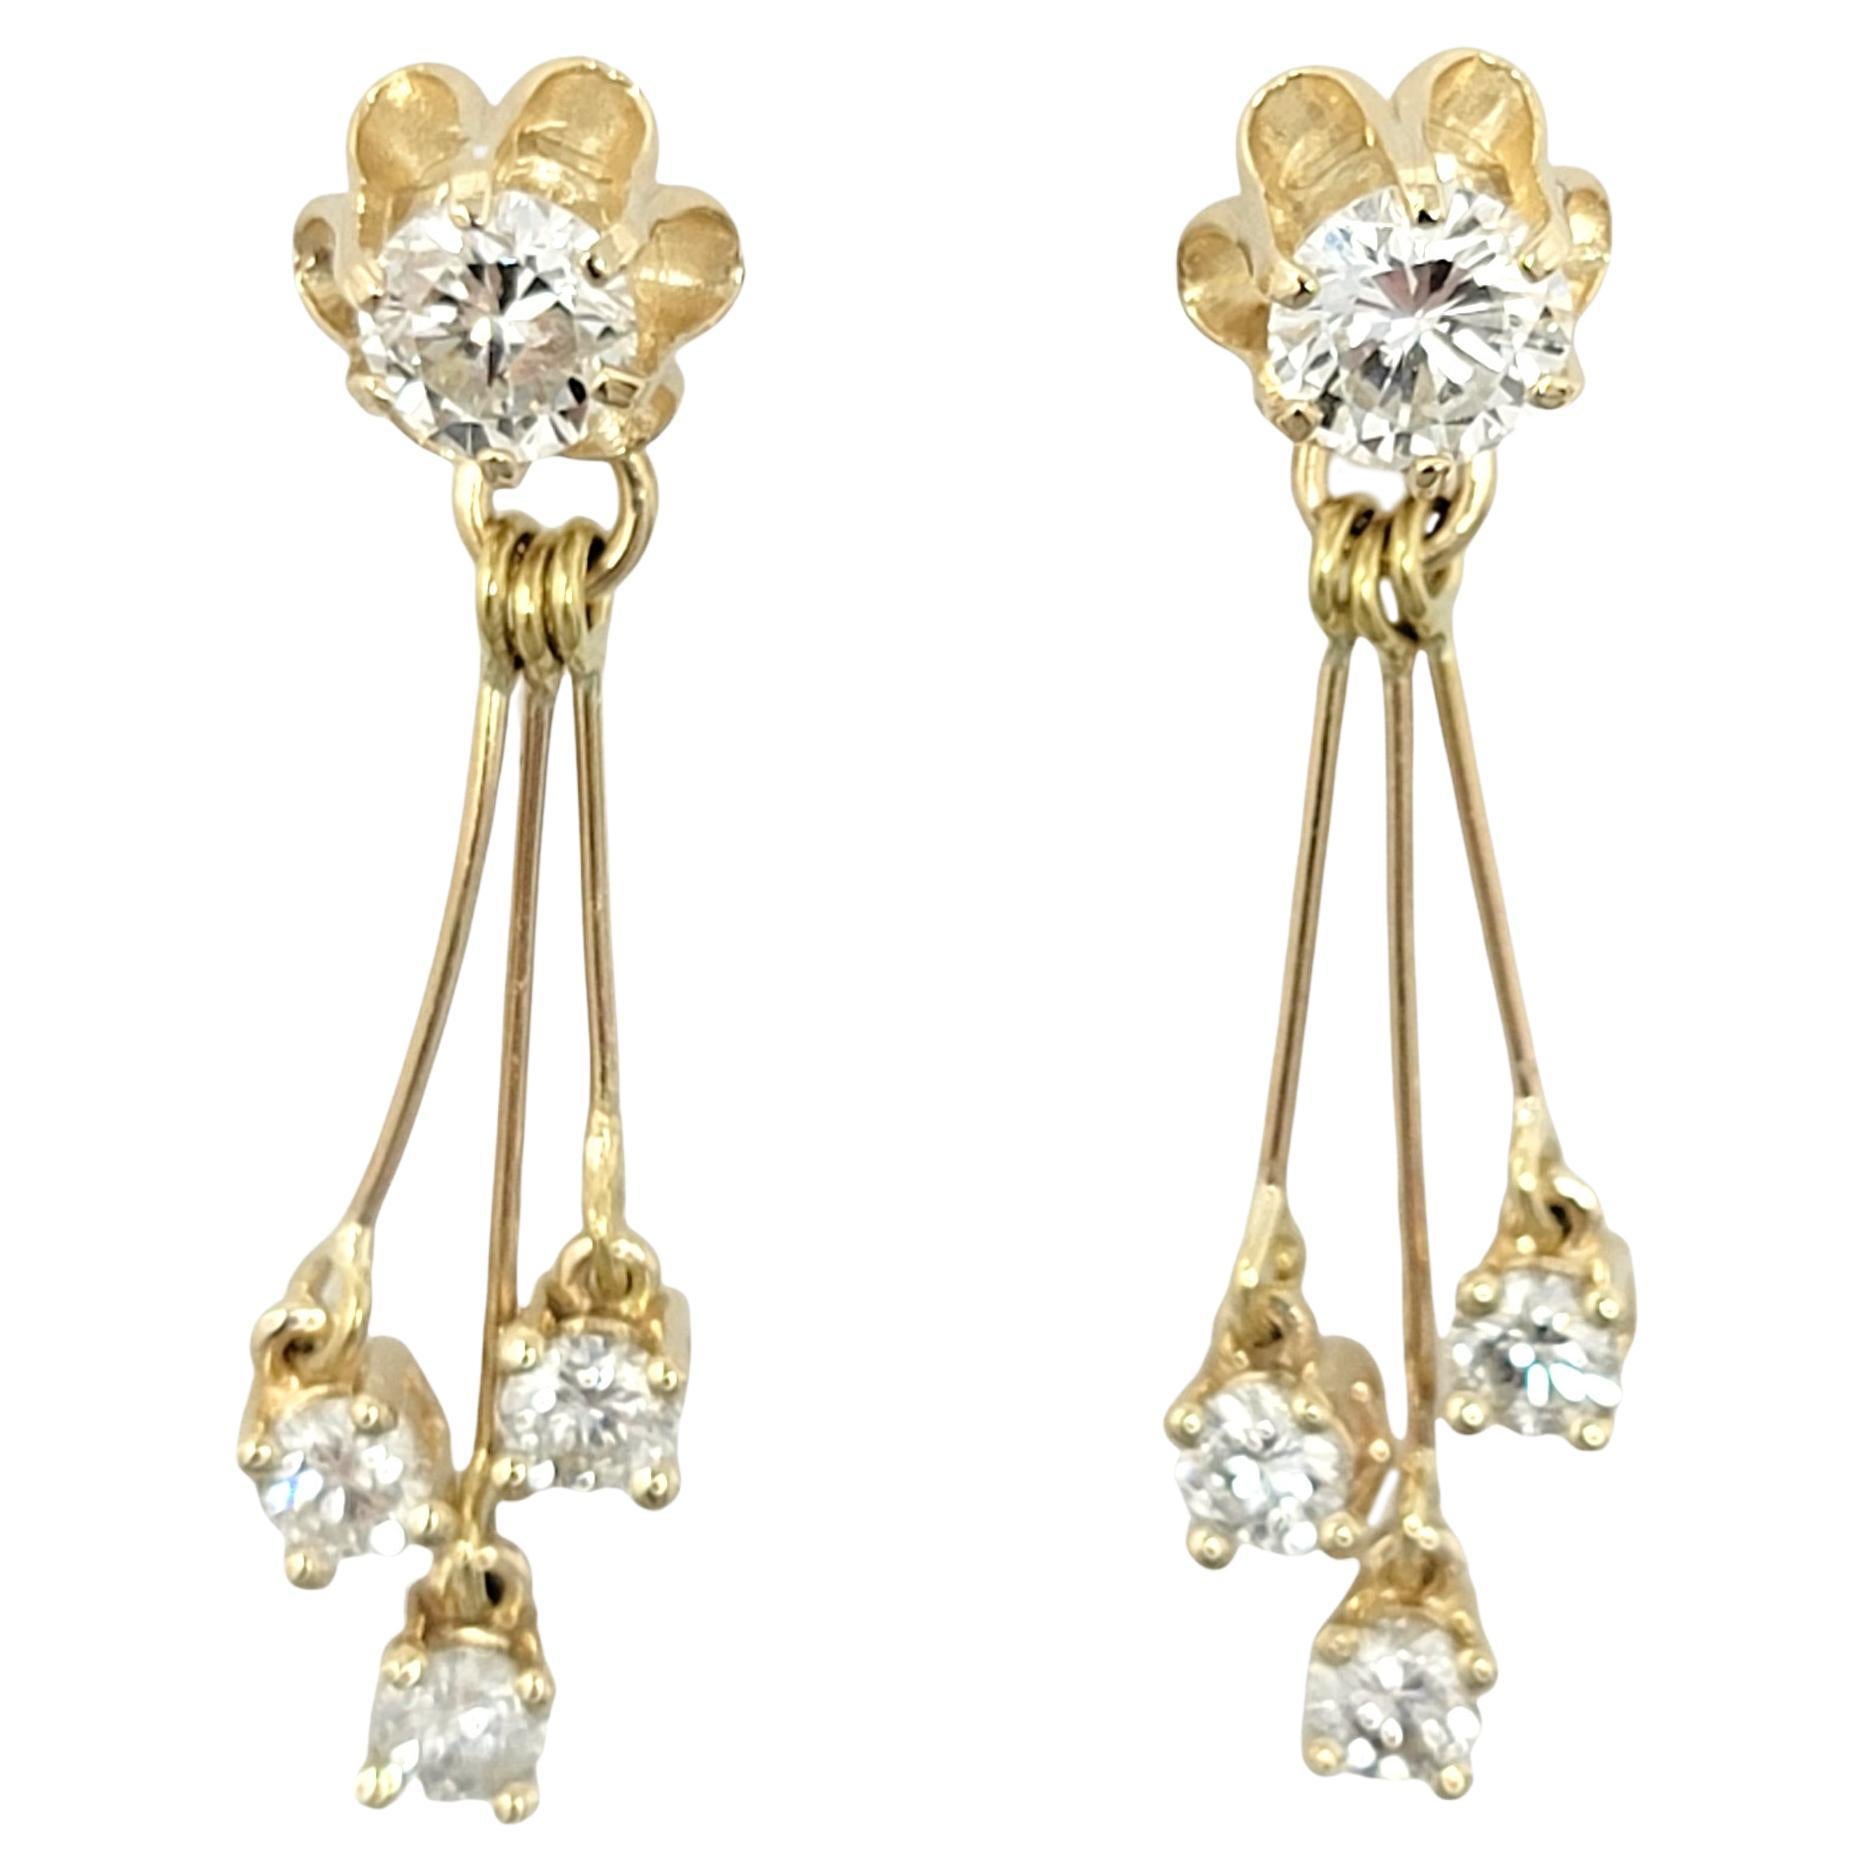 Round Diamond Stud Earrings with Removable Diamond Dangle Drops in Yellow Gold